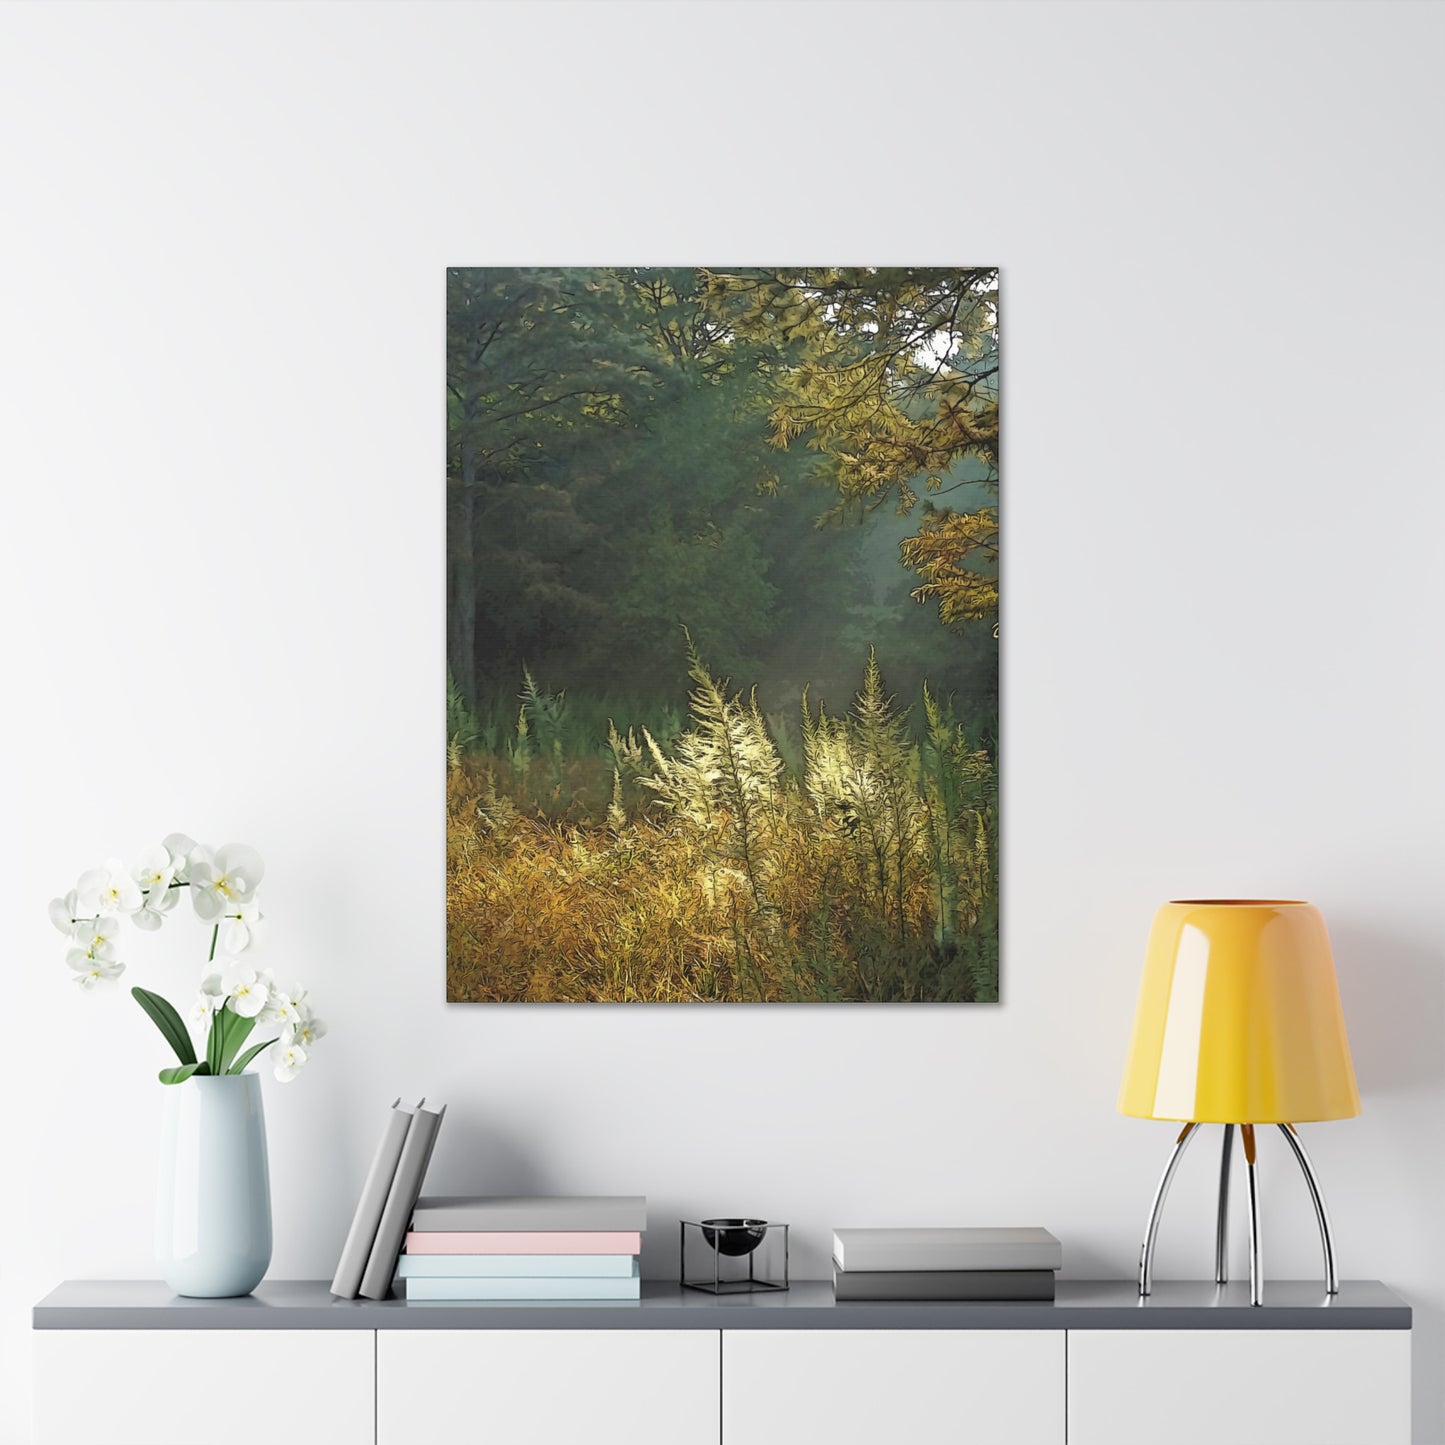 Sun Drenched Meadow - oil paint filter